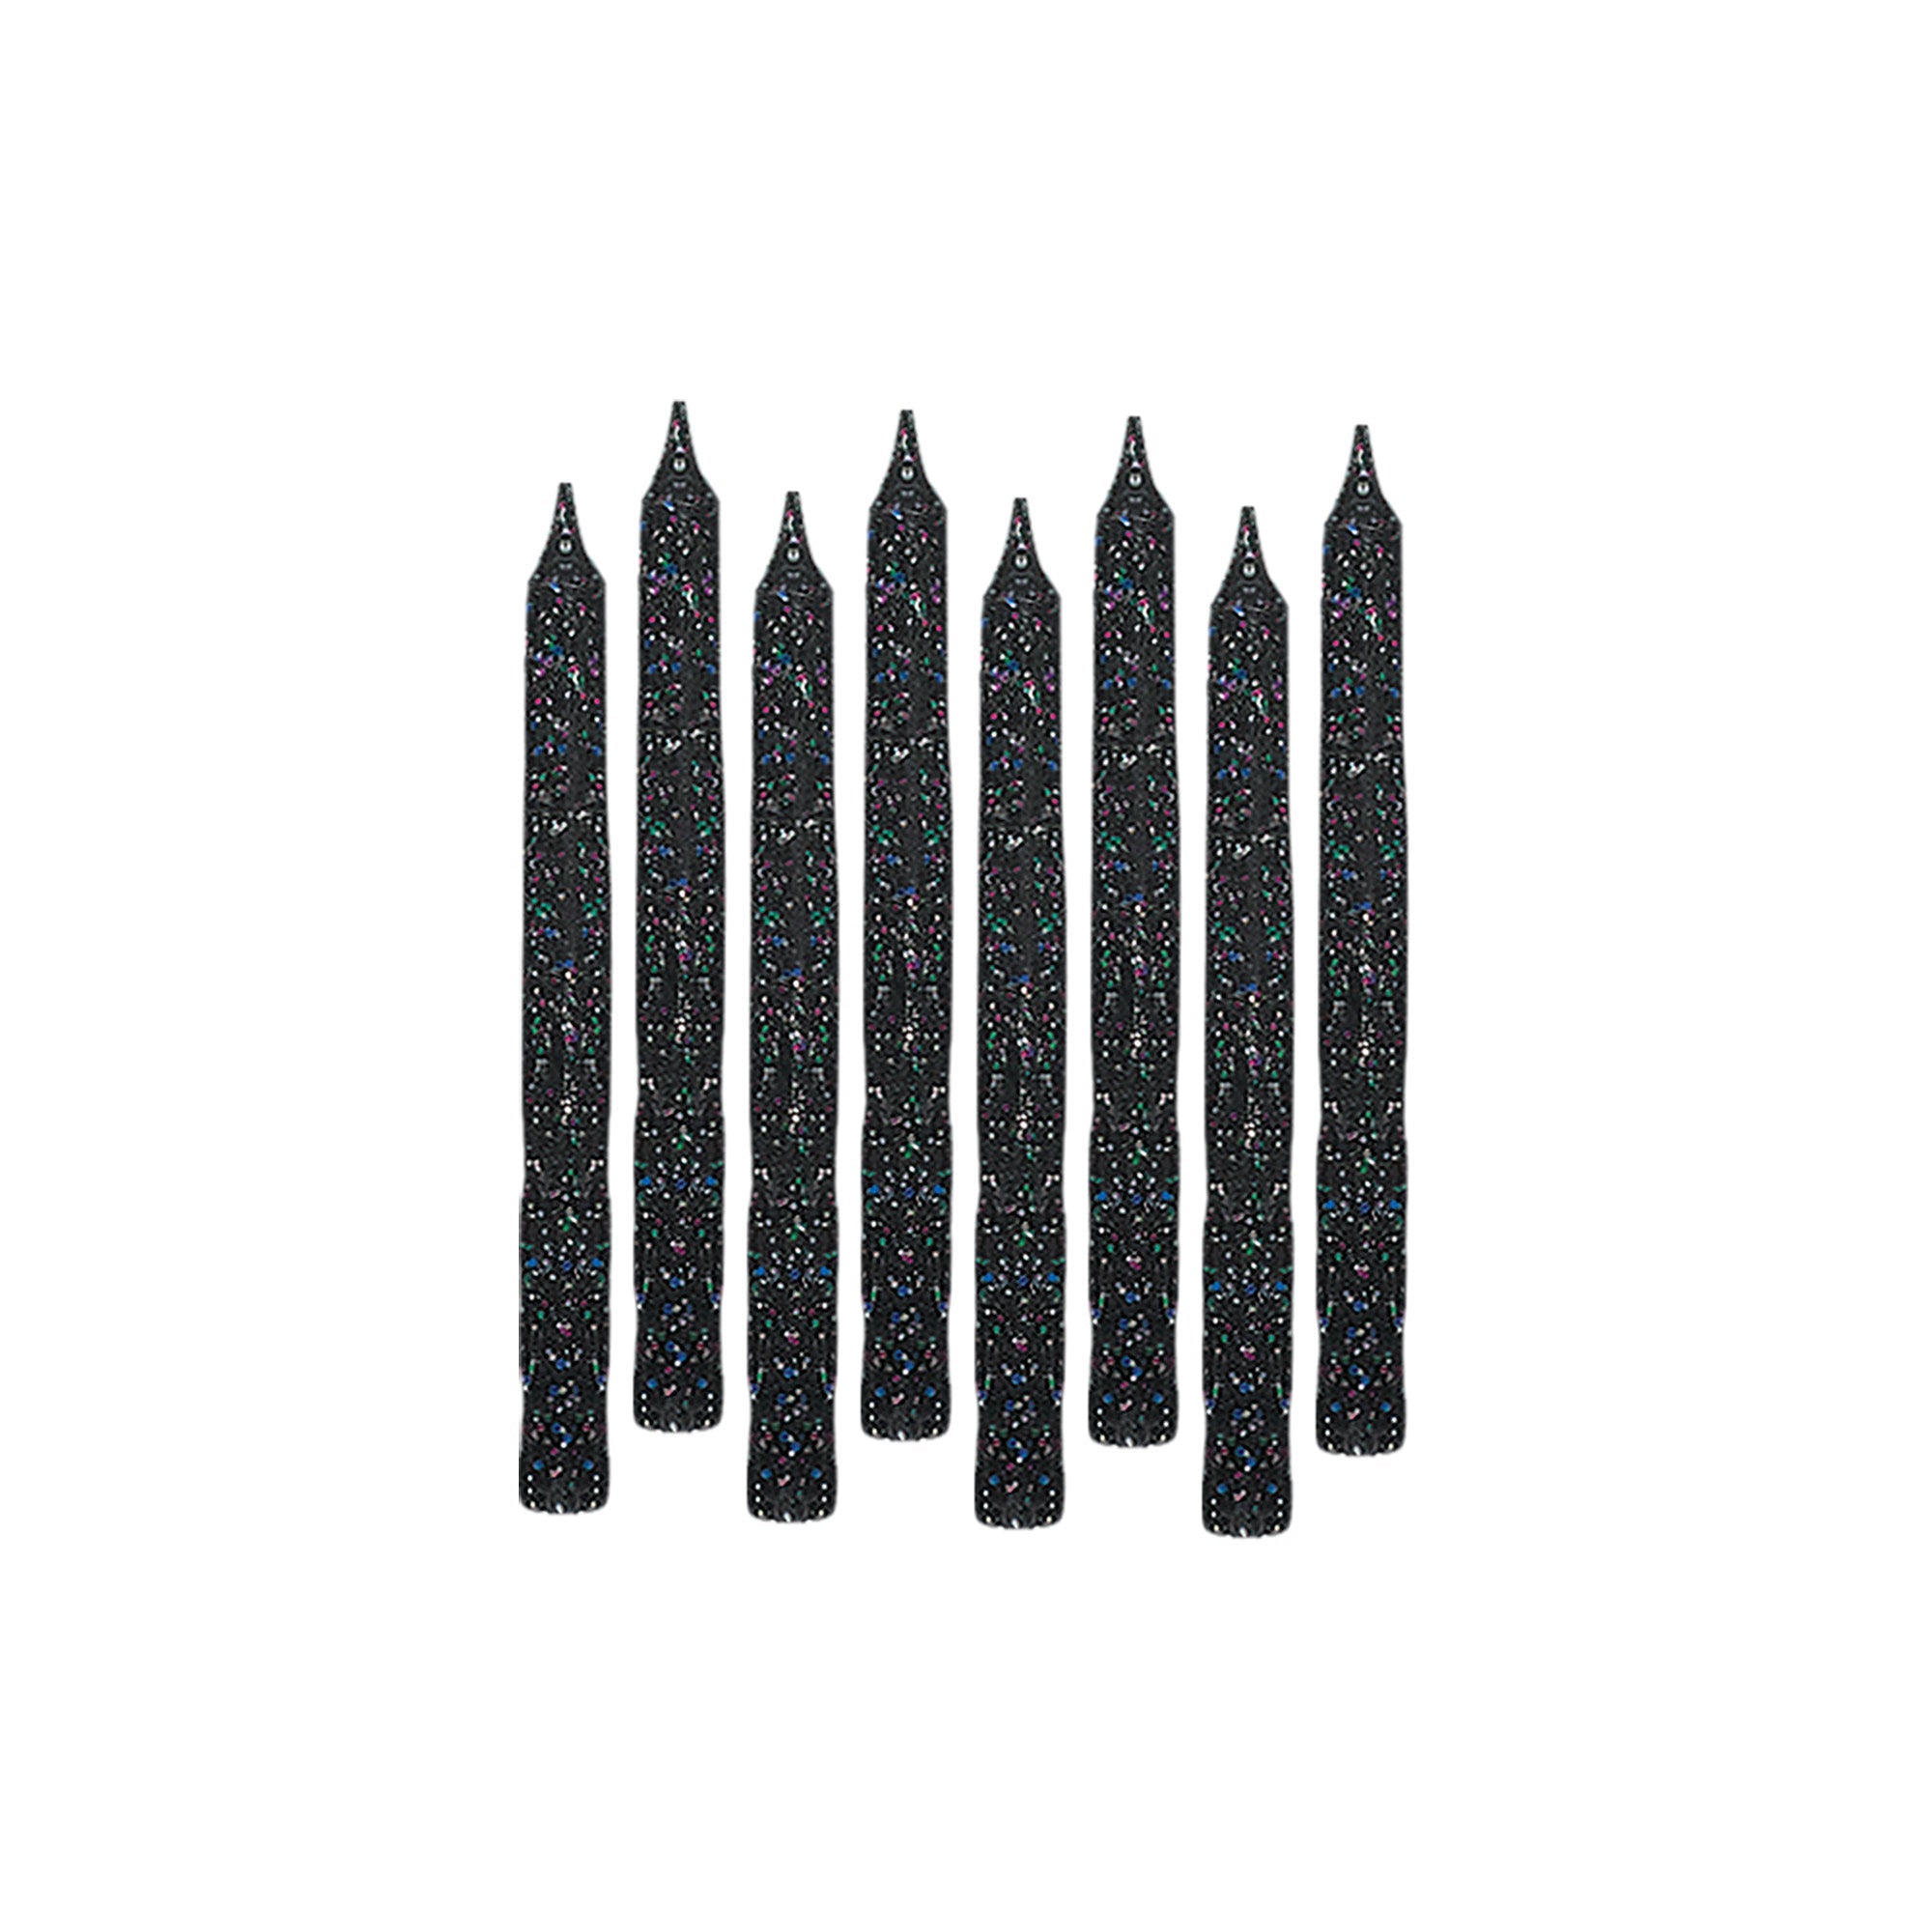 24 Large Spiral Candles Glitter  Black  3.25in